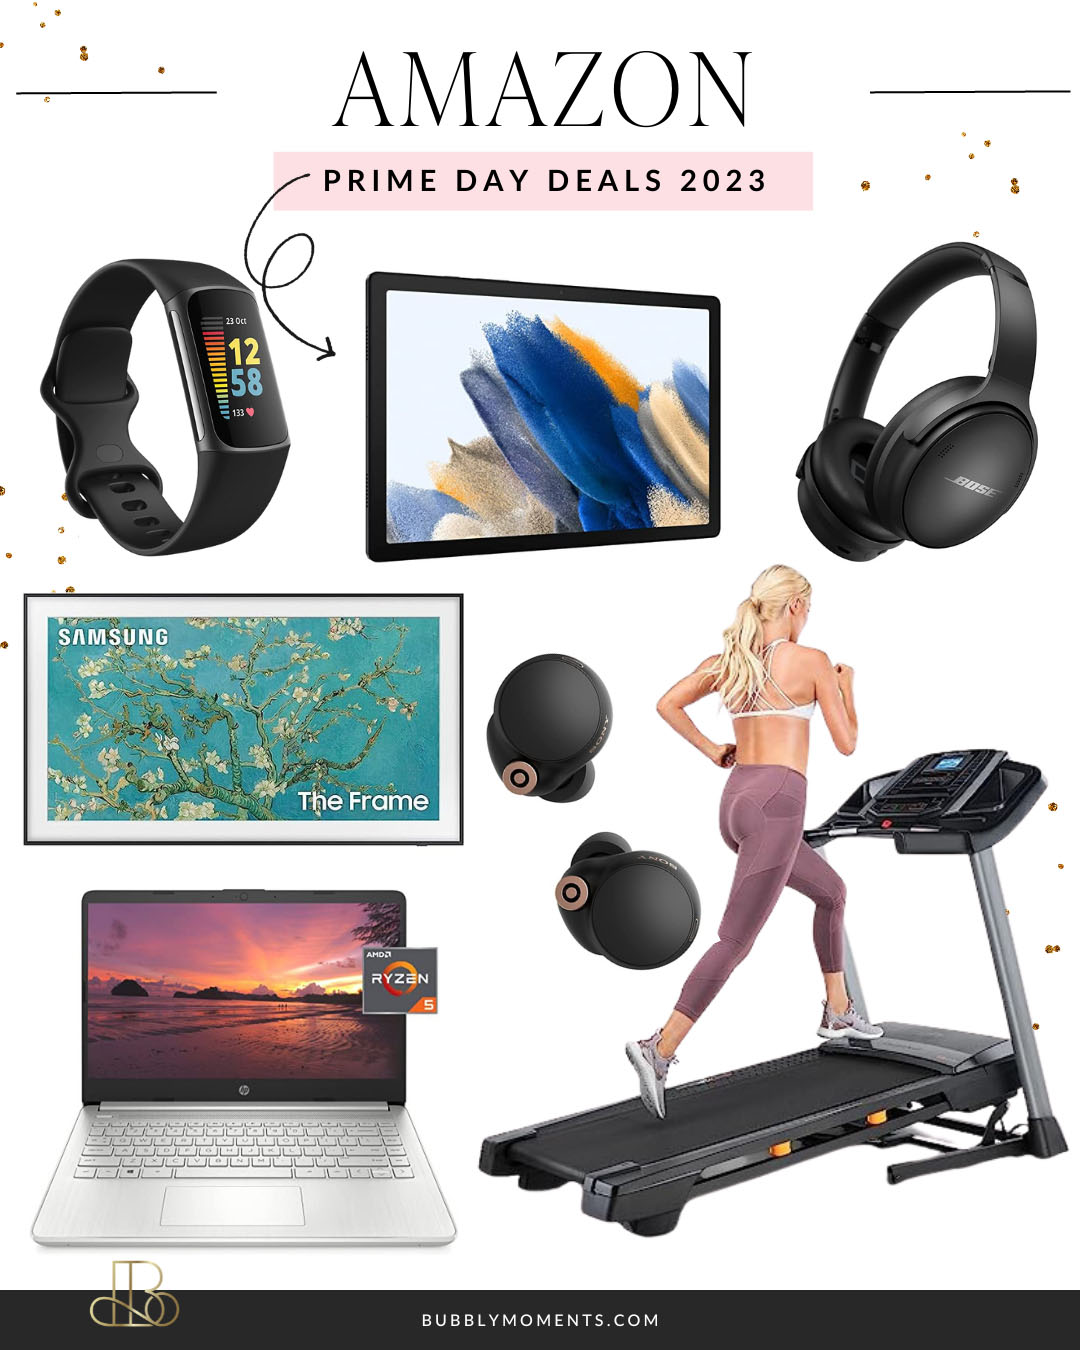 https://www.bubblymoments.com/wp-content/uploads/2023/07/bubbly-moments-prime-day-deals-2023-main-1.jpg